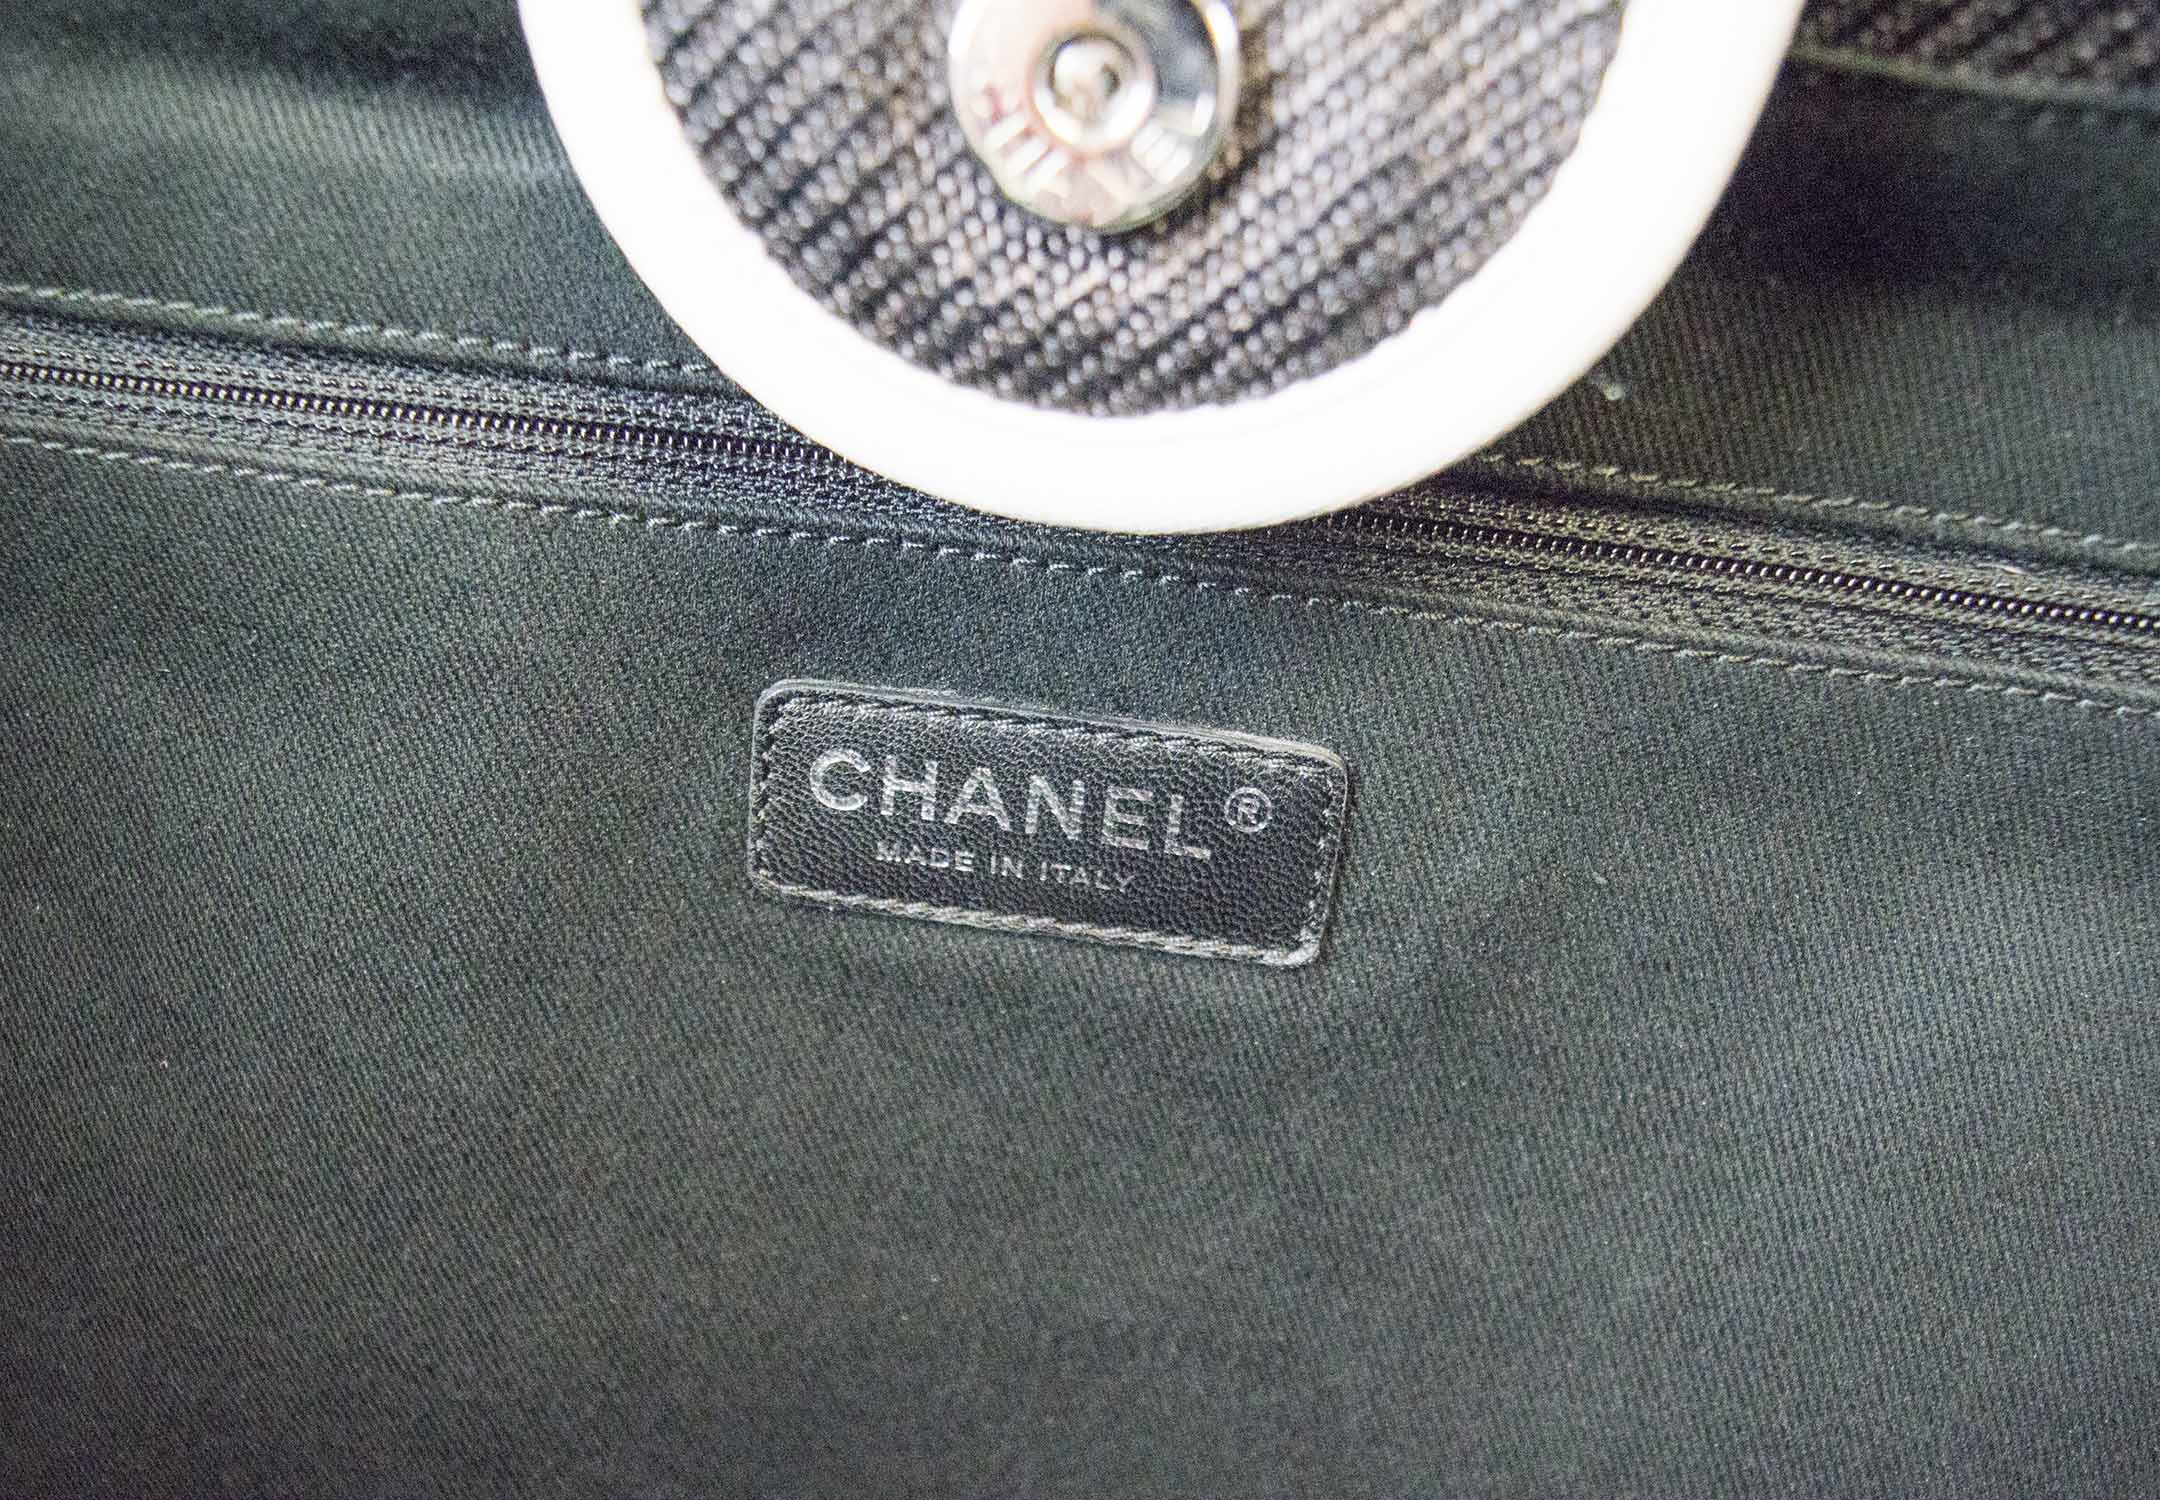 Chanel Deauville Bowling Bag in Midnight Blue Canvas & Black Calfskin - SOLD